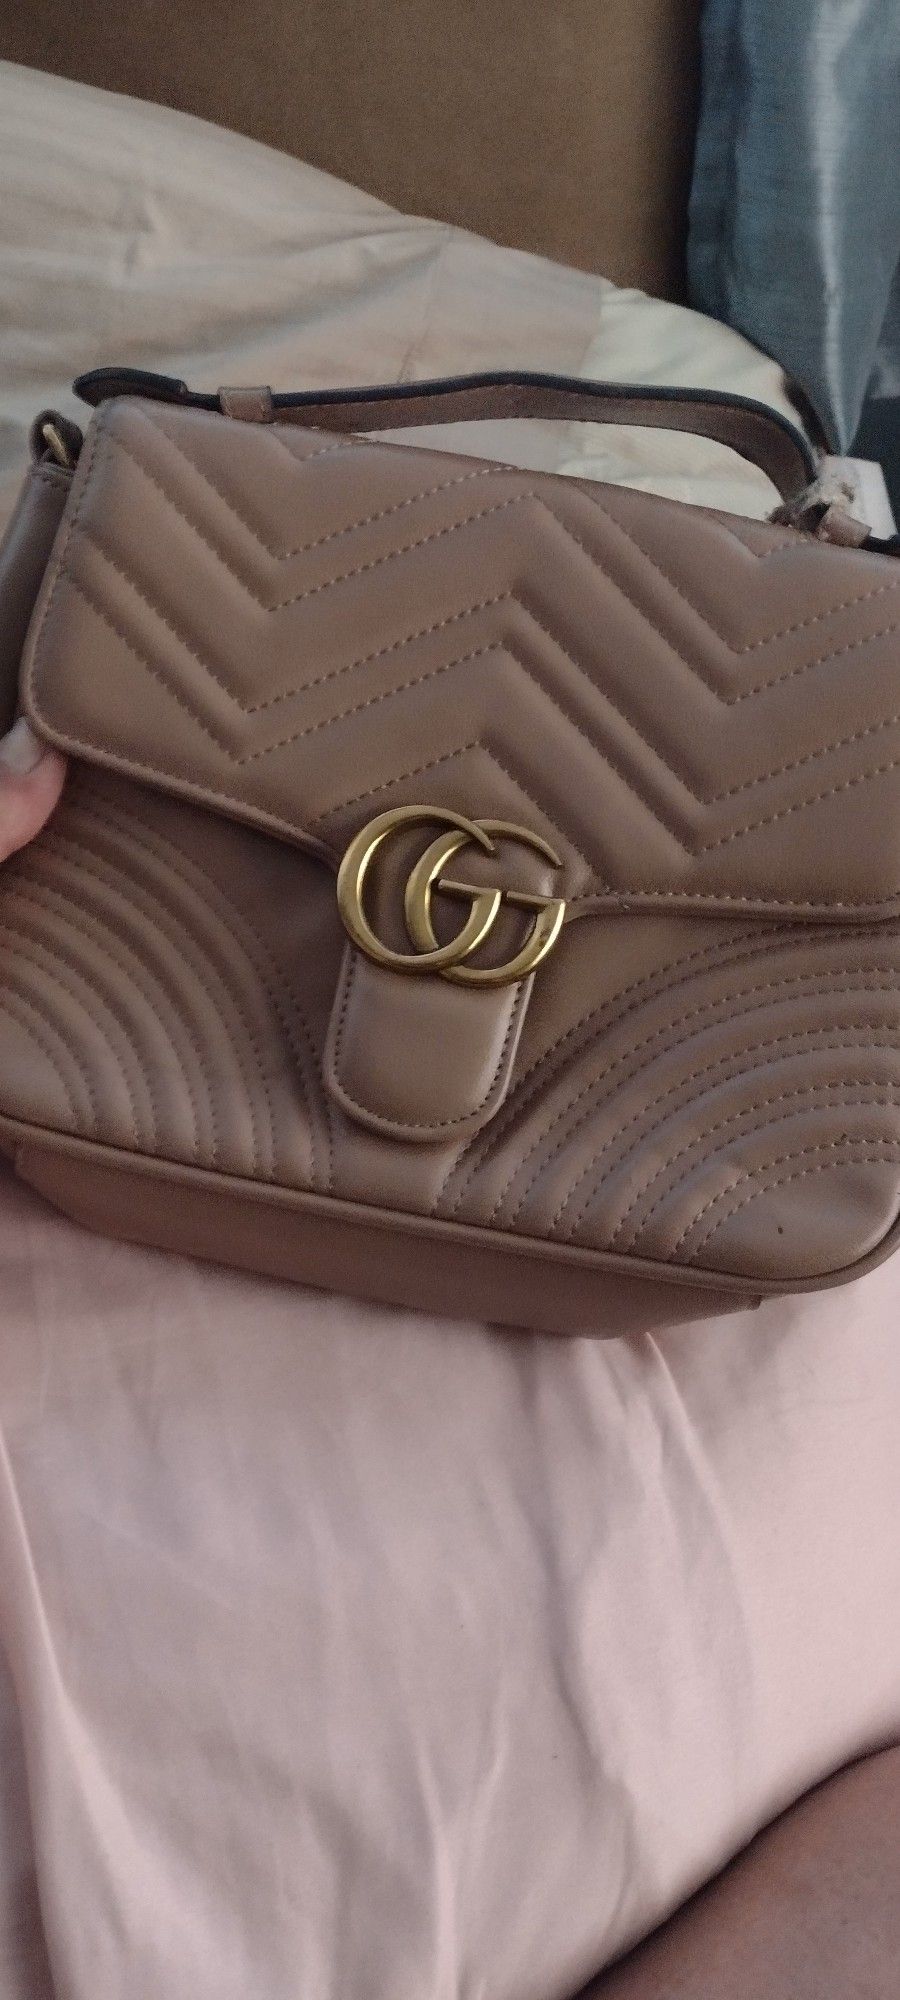 Gucci Mini sac GG marmont - Quilted chevron leather - L 21cm x 15.5cm x D 8cm - Aged gold finish - 